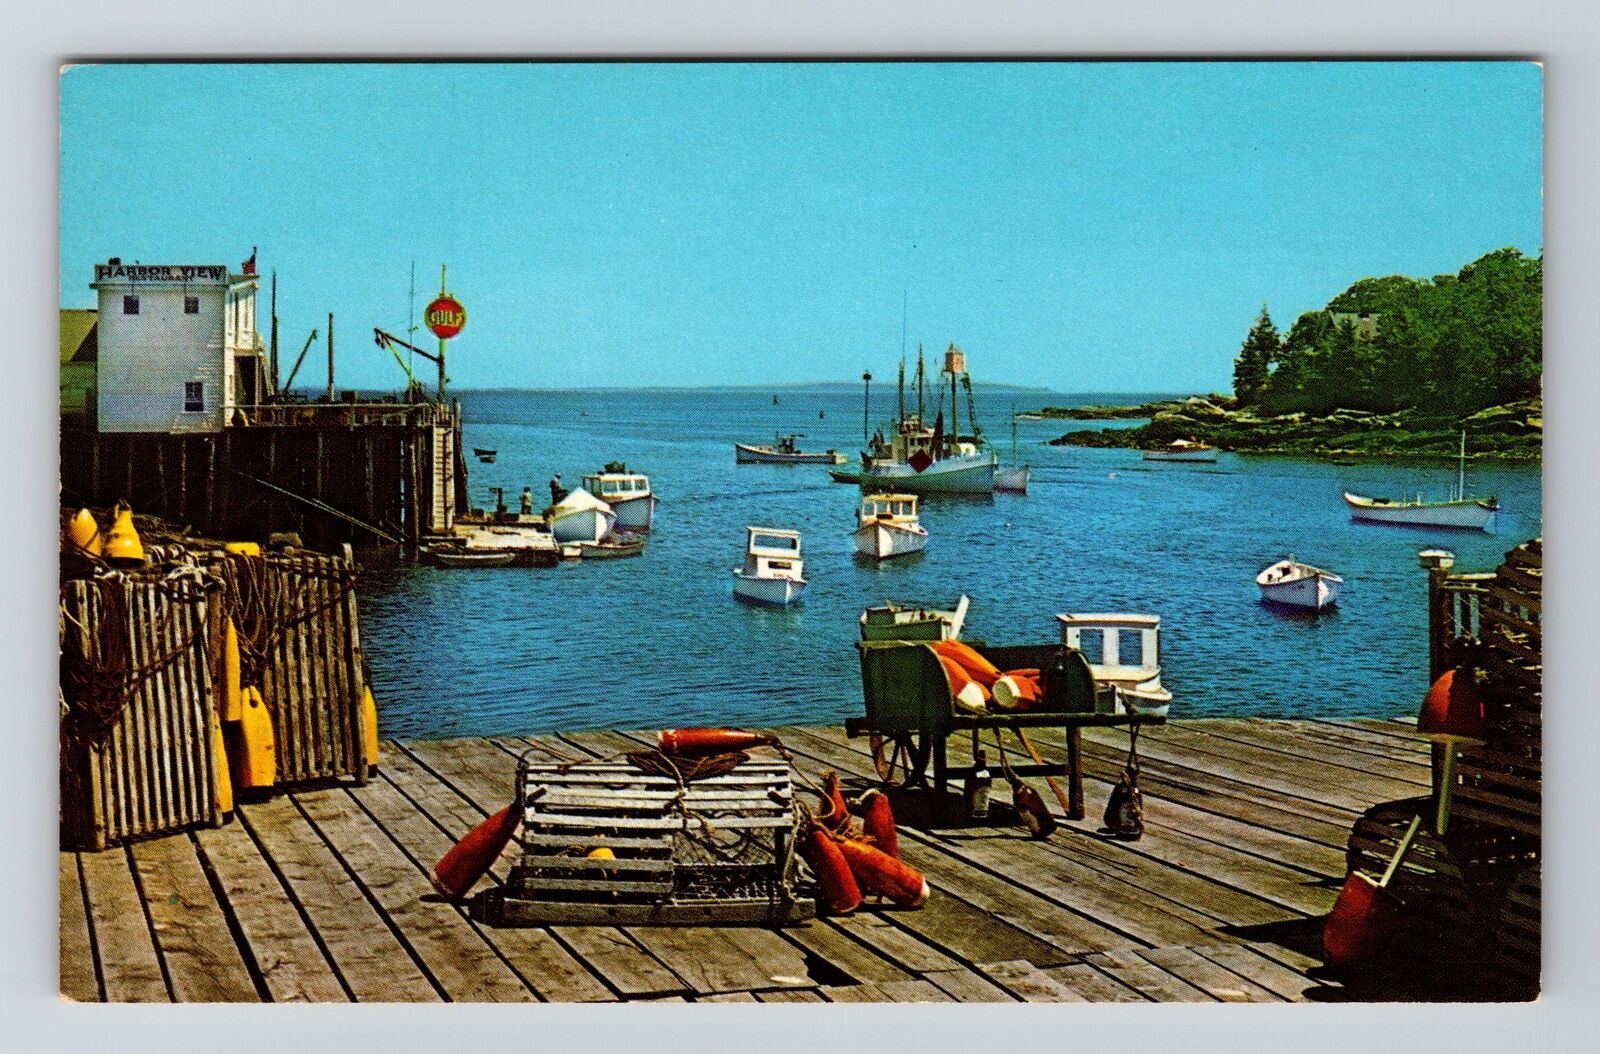 New Harbor ME-Maine, Wharf And Harbor, Scenic View, Vintage Postcard